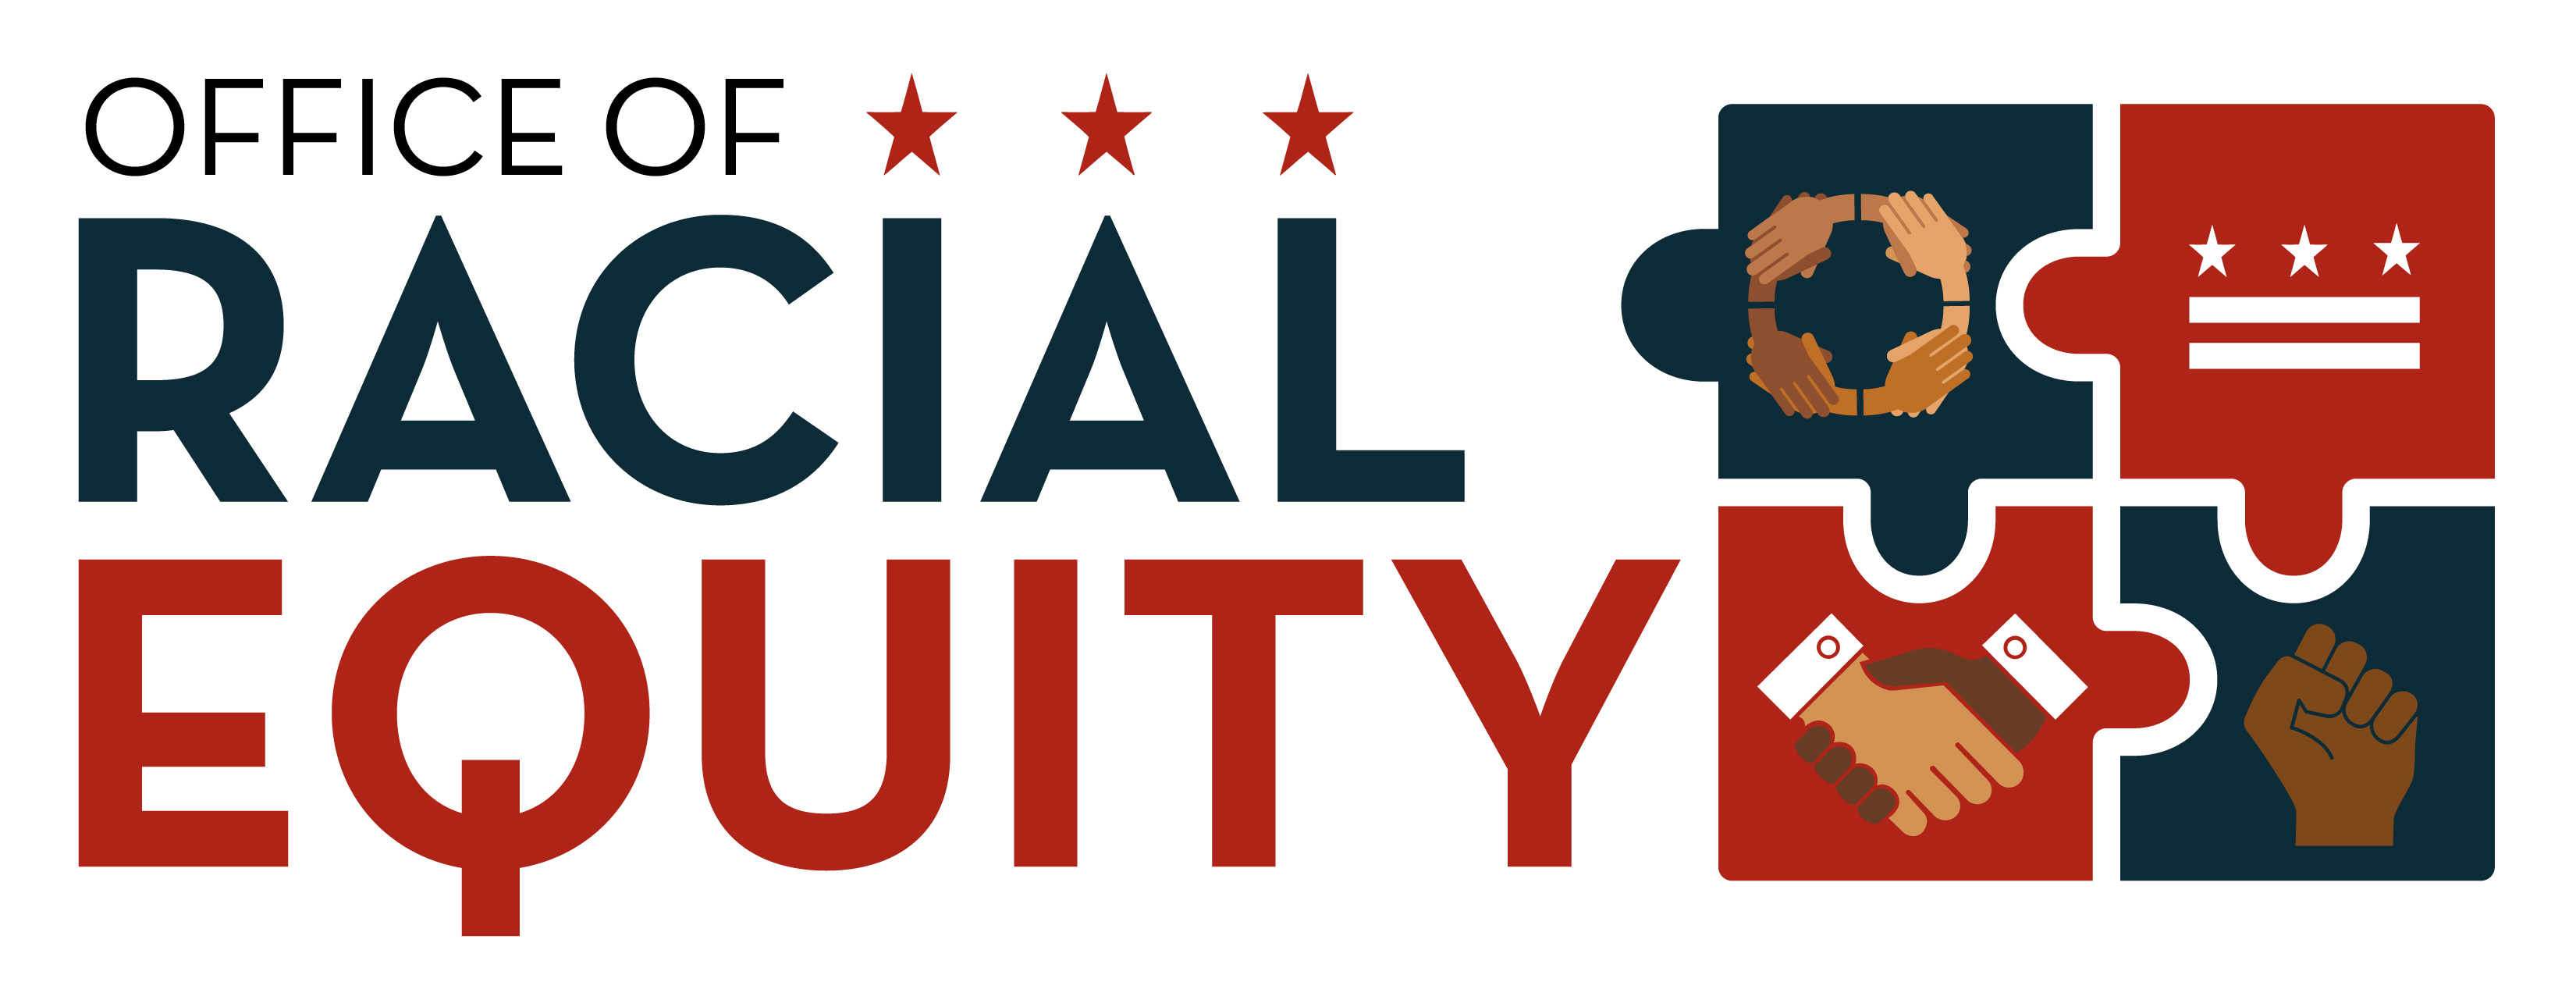 Logo of the Office of Racial Equity